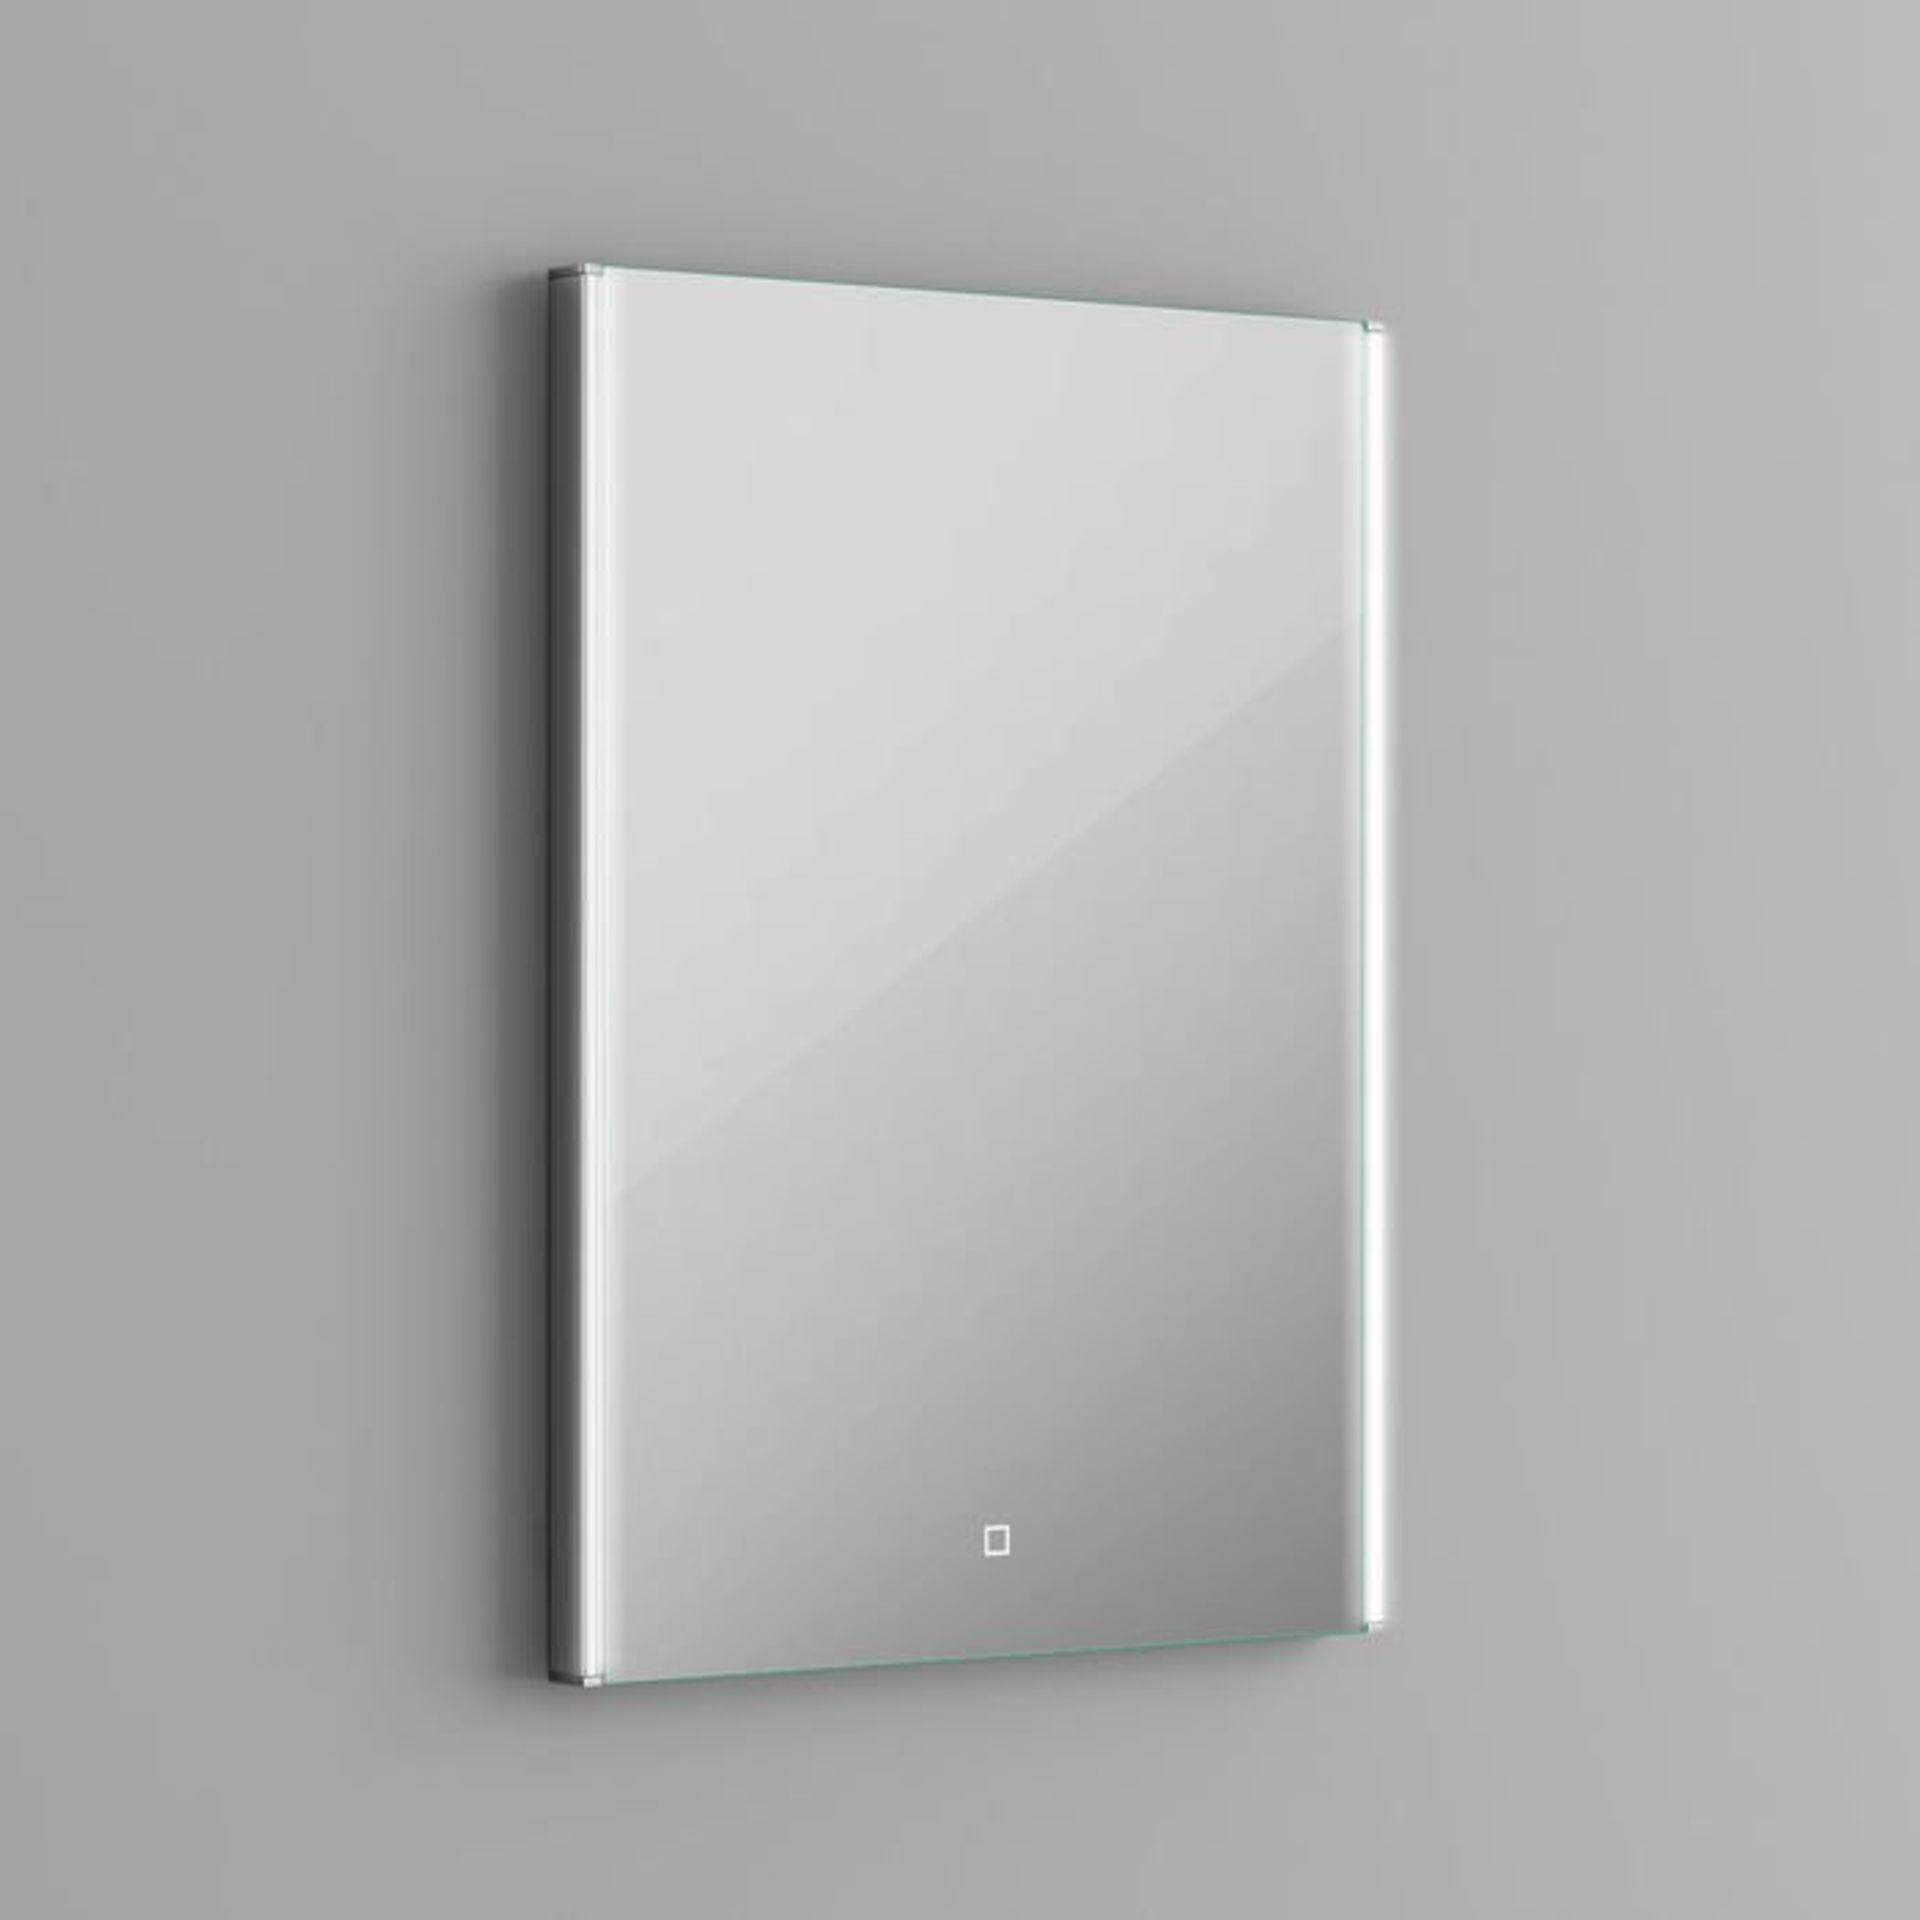 (H170) 700x500mm Lunar Illuminated LED Mirror - Switch Control. RRP £349.99. Energy efficient LED - Image 3 of 5